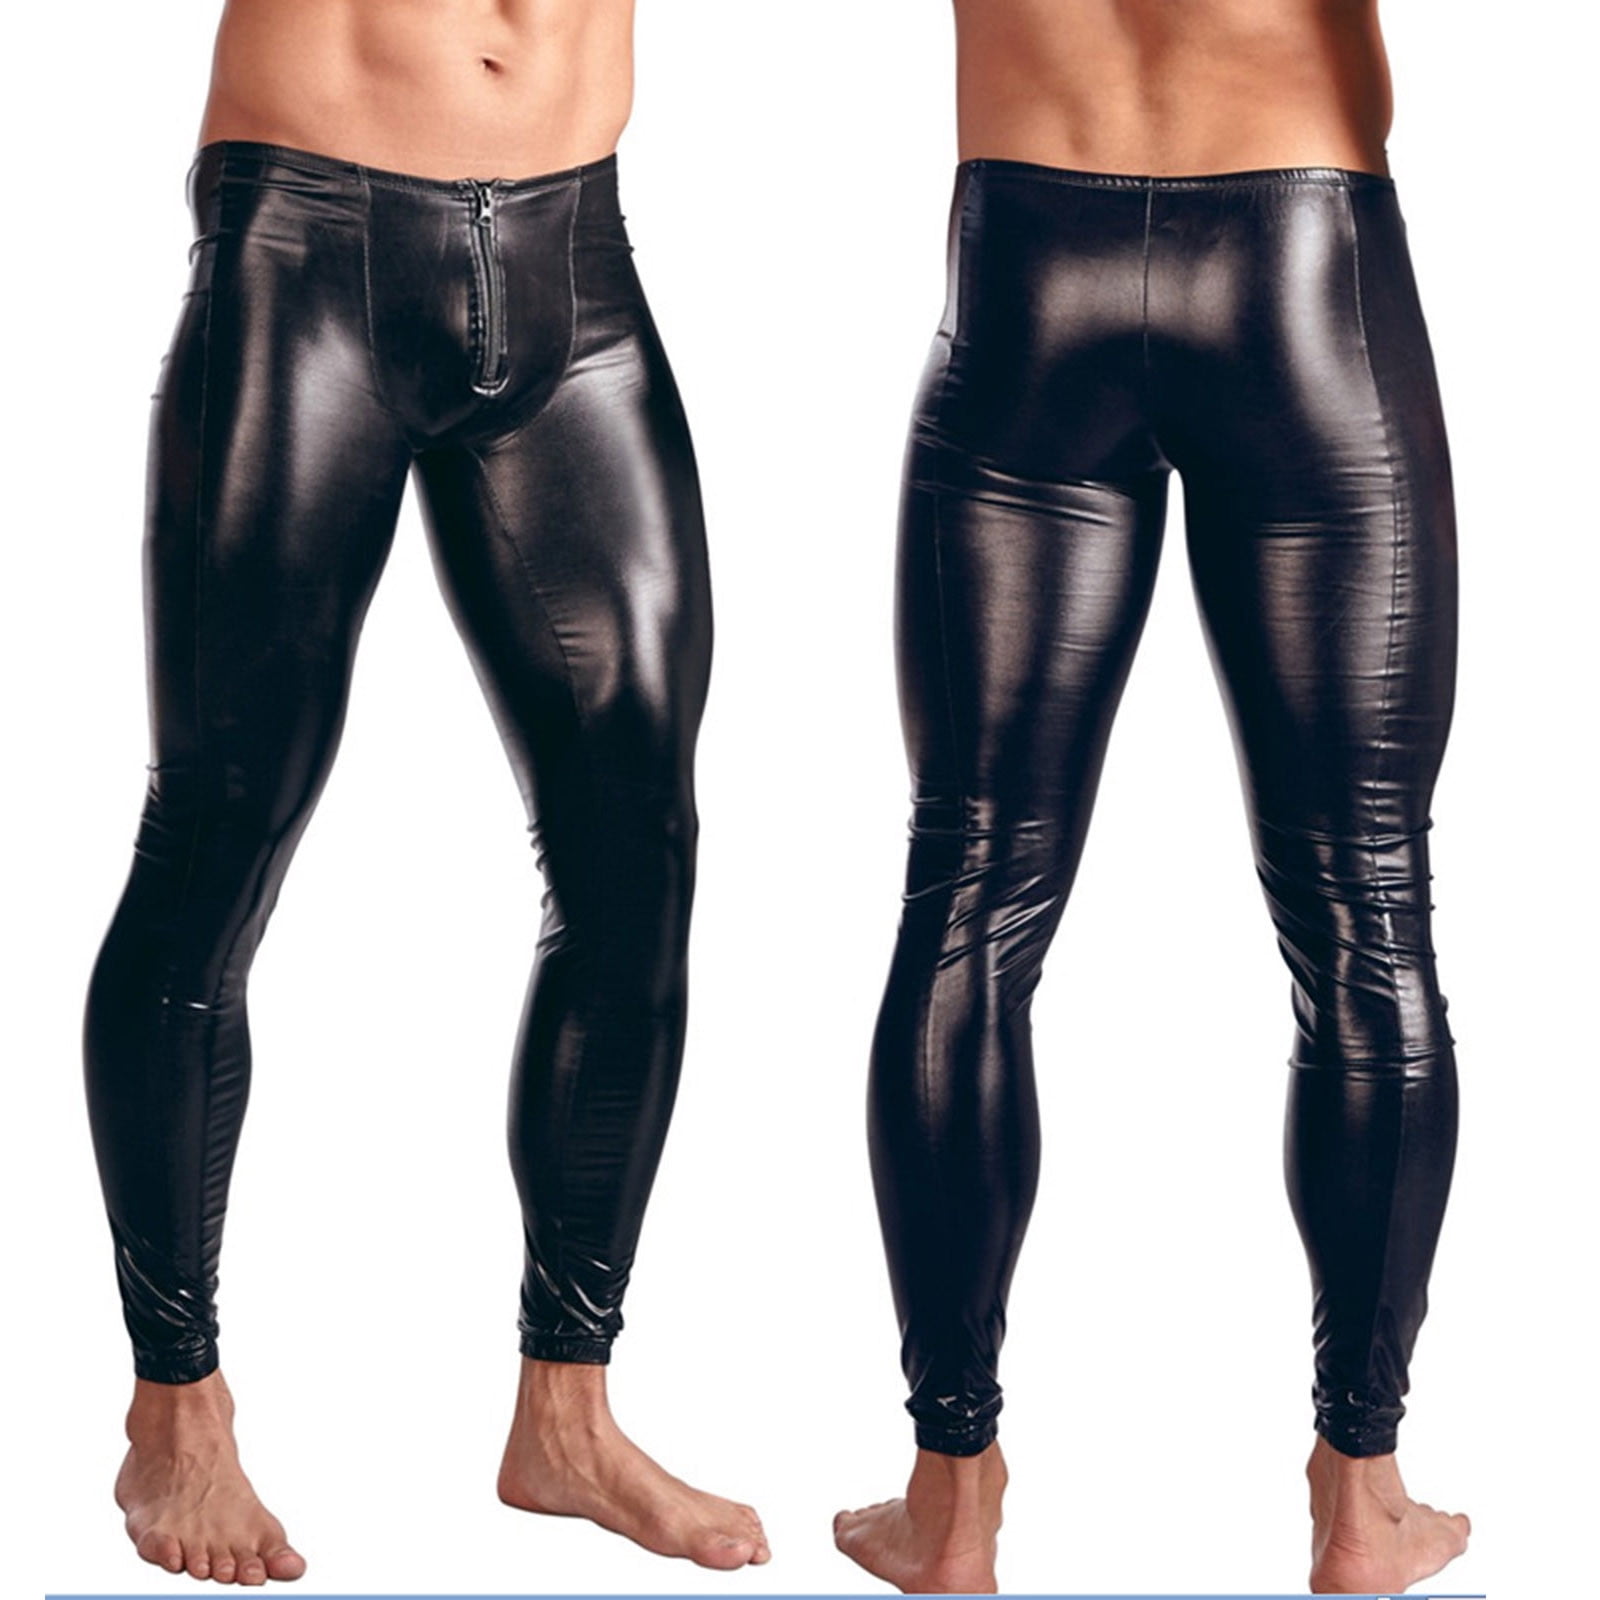 New Men Latex Stretchy Leather Pants Slim Clothing PU Leather Skinny Pants  Wet Look Tights Pants  Wish